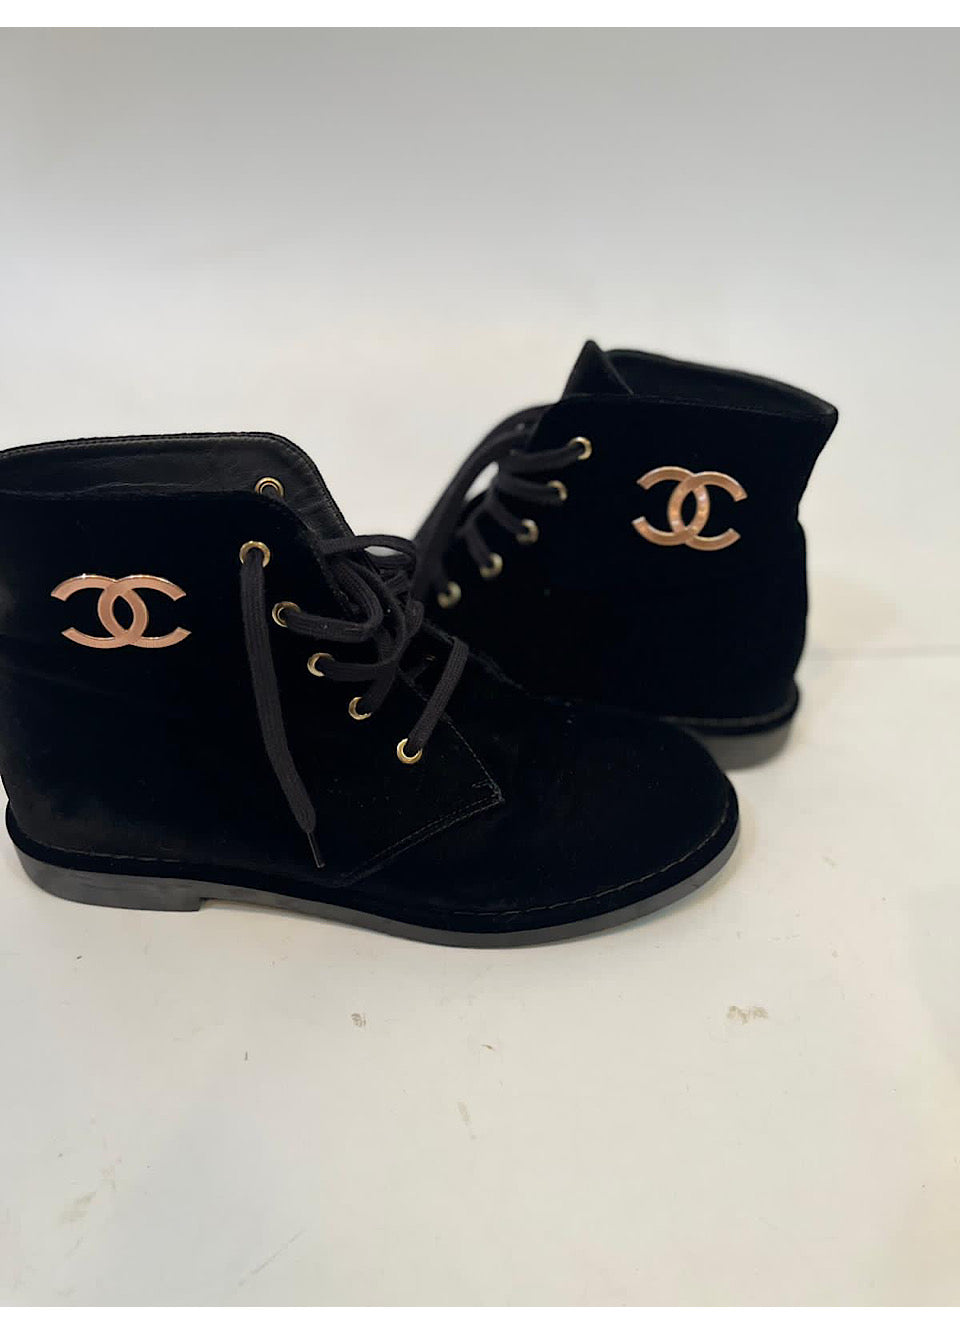 Chanel On Sale Up To 90% Off Retail